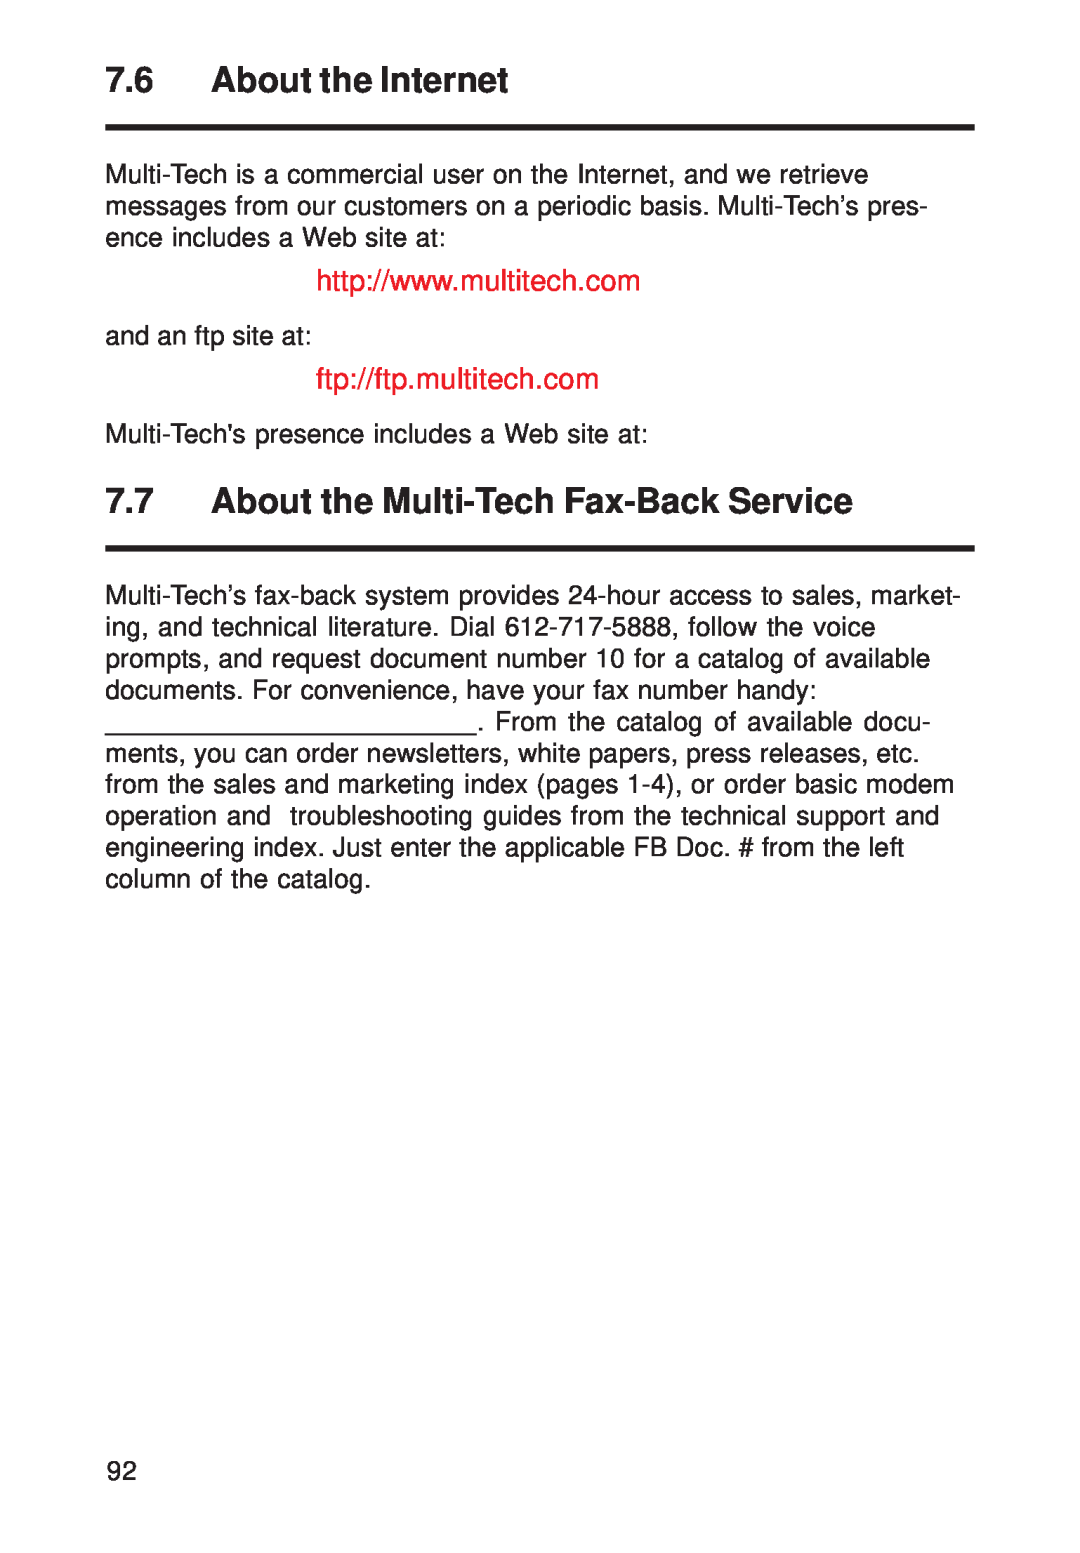 Multi-Tech Systems FR111 owner manual About the Internet, About the Multi-Tech Fax-Back Service, ftp//ftp.multitech.com 